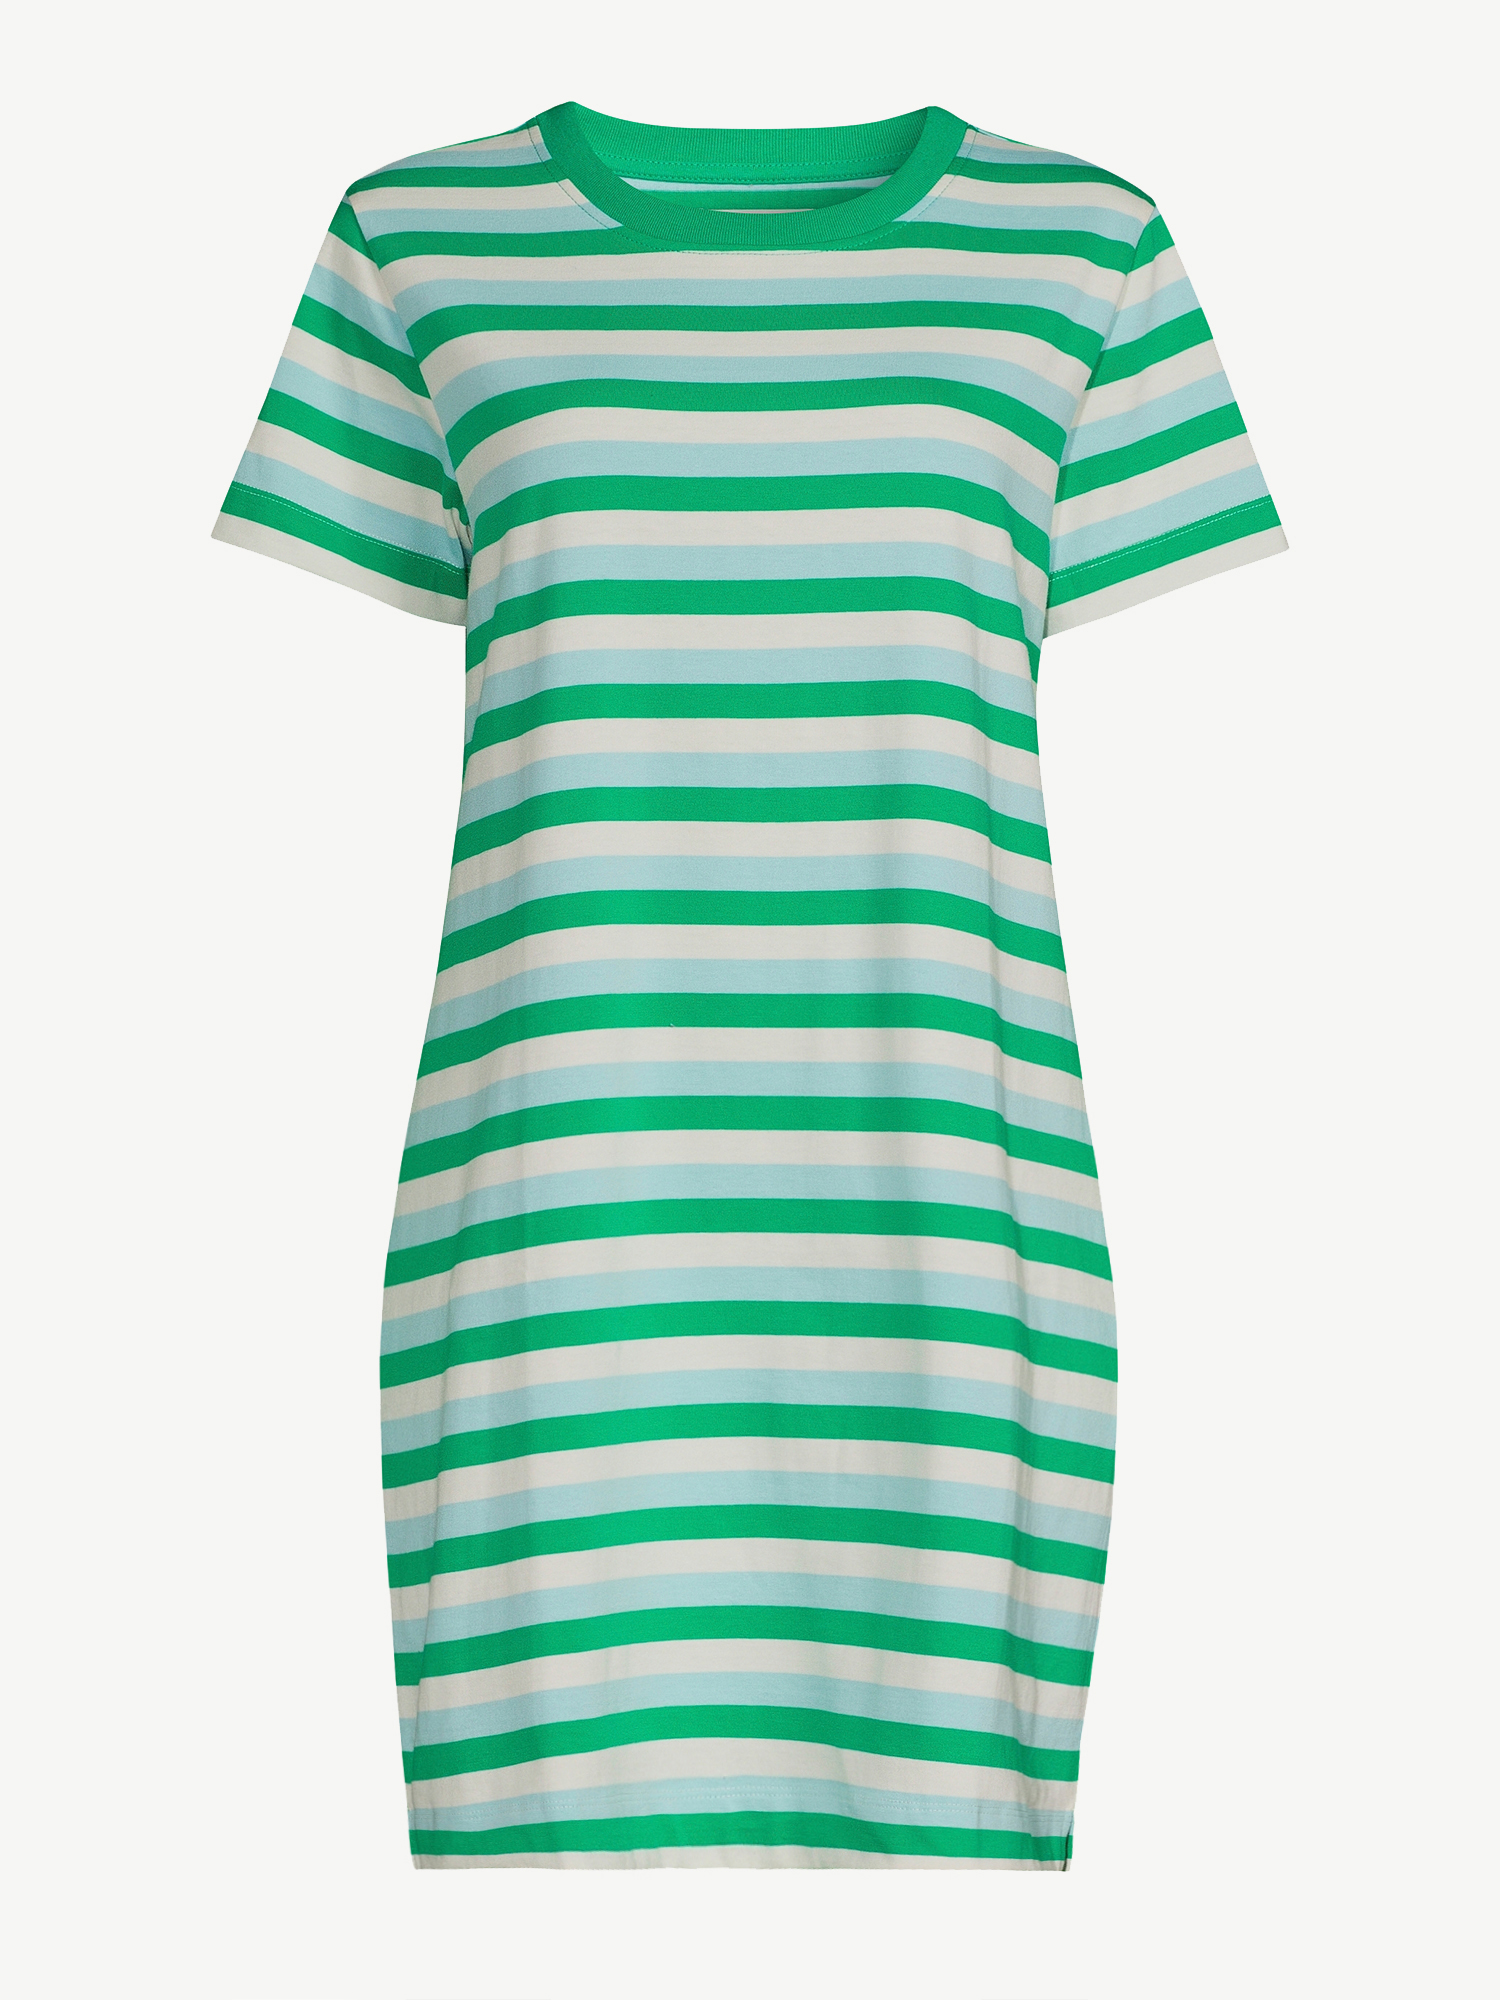 Free Assembly Women's Mini T-Shirt Dress with Short Sleeves, Sizes XS-XXXL - image 2 of 6